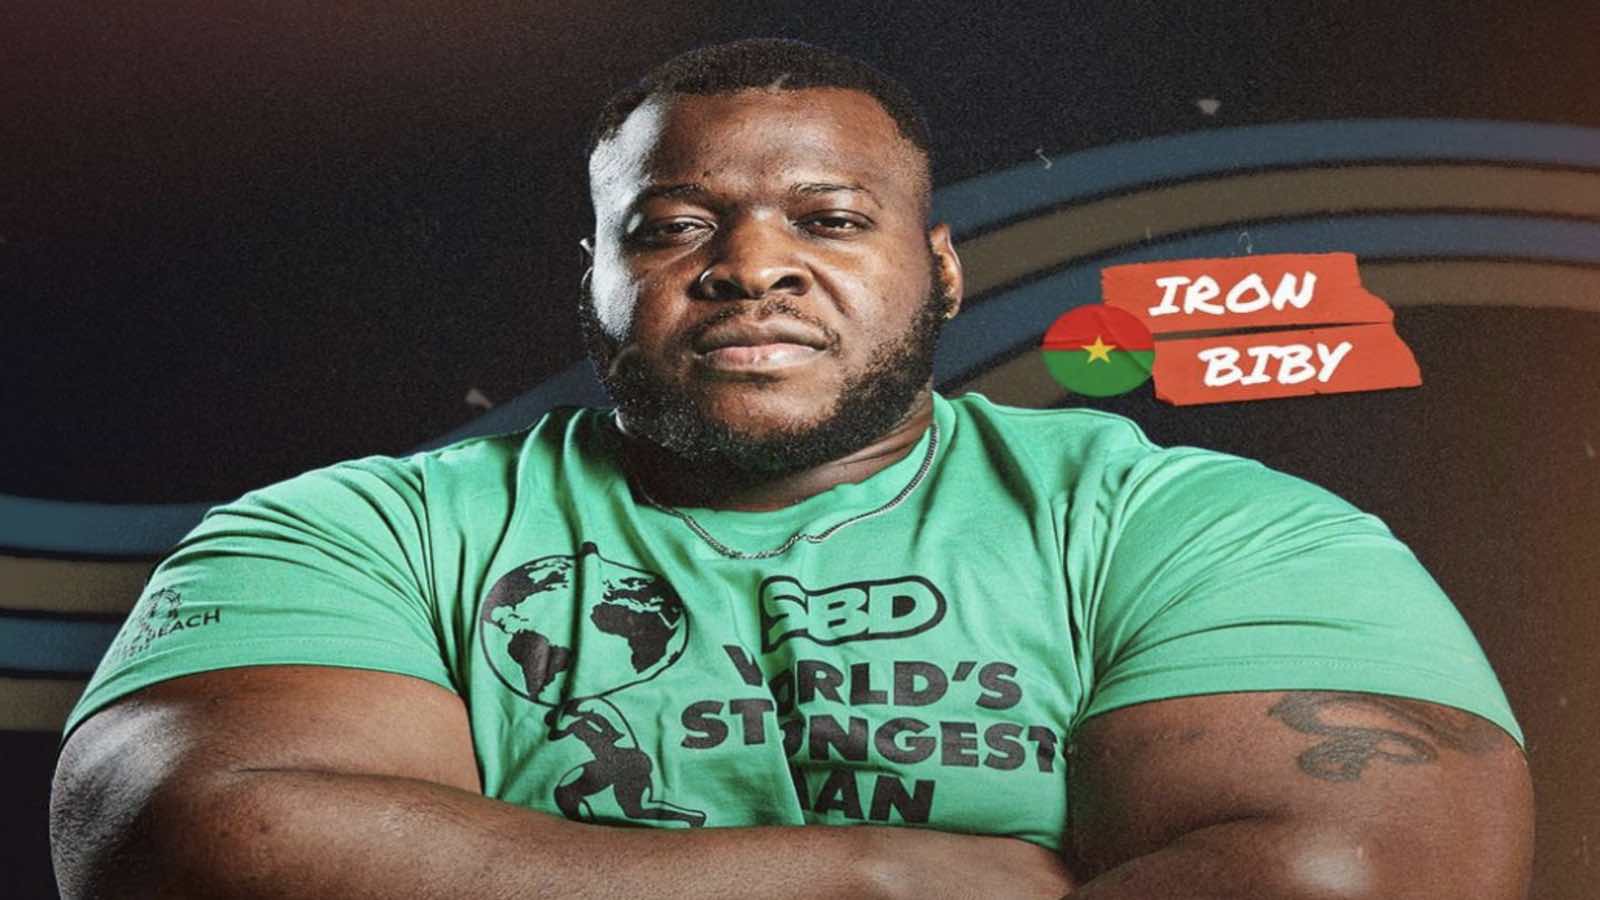 Cheick “Iron Biby” Sanou Withdraws from 2023 World’s Strongest Man, Kristján Jón Haraldsson in as Substitute